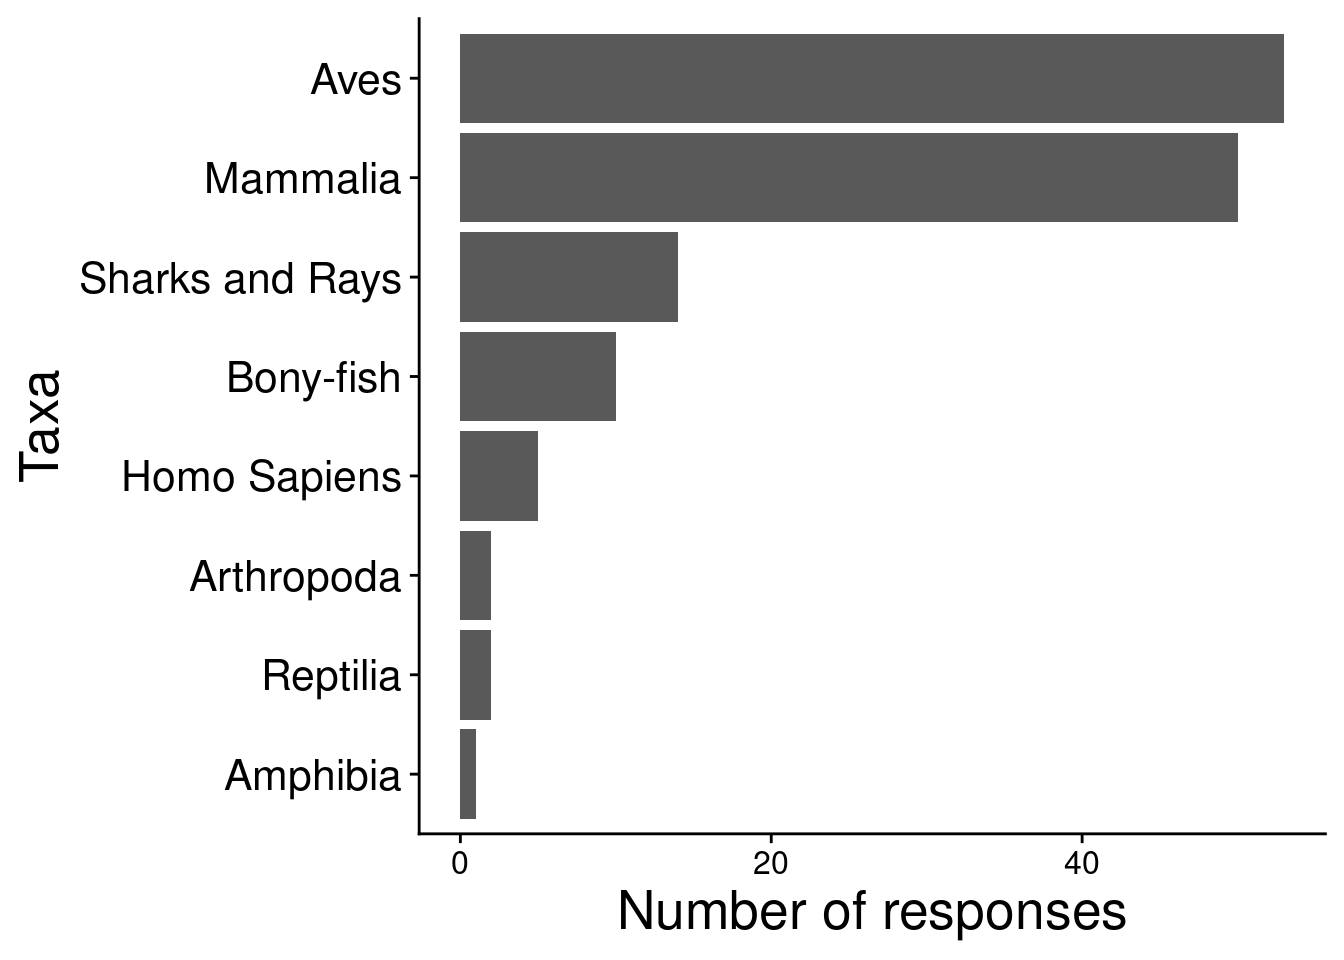 Horizontal bar plot of the participants vote on which taxonomical group they considered to be the most studied in movement ecology. In decreasing order of votes: Aves, Mammalia, Sharks and Rays, Bony-fish, Homo Sapiens, Arthropoda, Reptilia, and Amphibia.